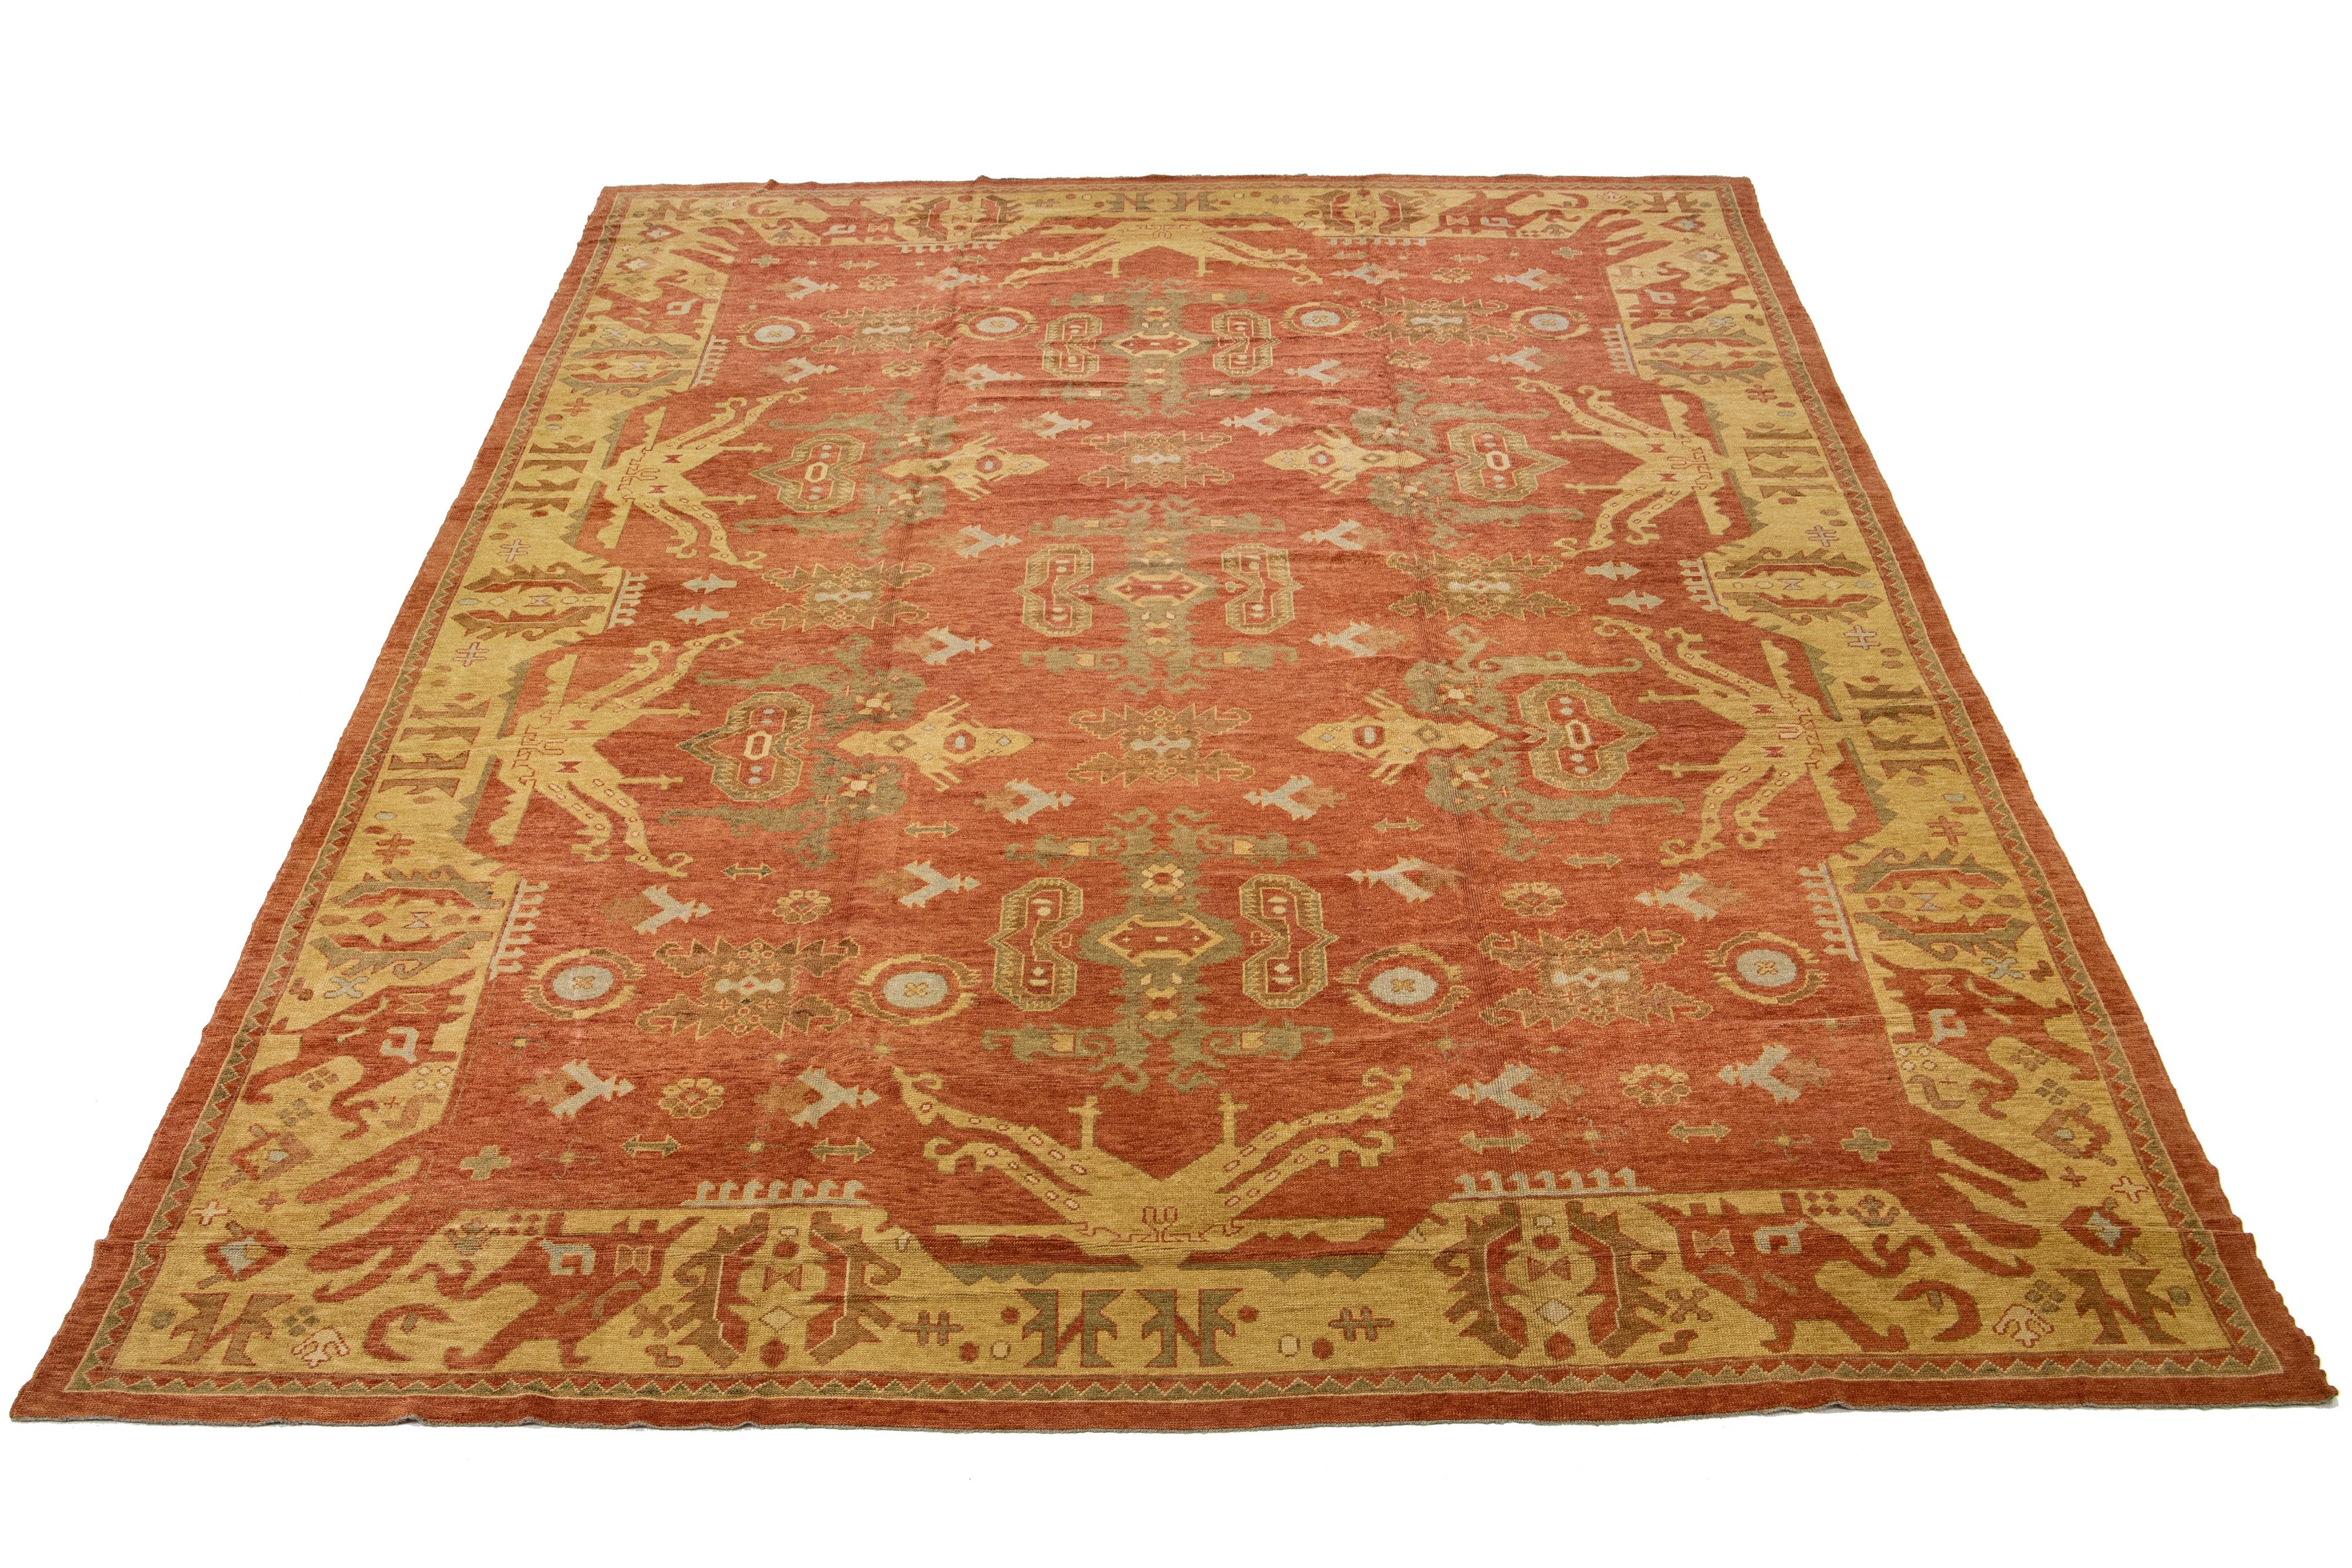 Featuring intricate hand-knotting, this Turkish wool rug boasts an eye-catching deep orange-copper color field framed by a subtle tan hue, with floral geometry in shades of green and blue for a stunning effect.

This rug measures: 14'10